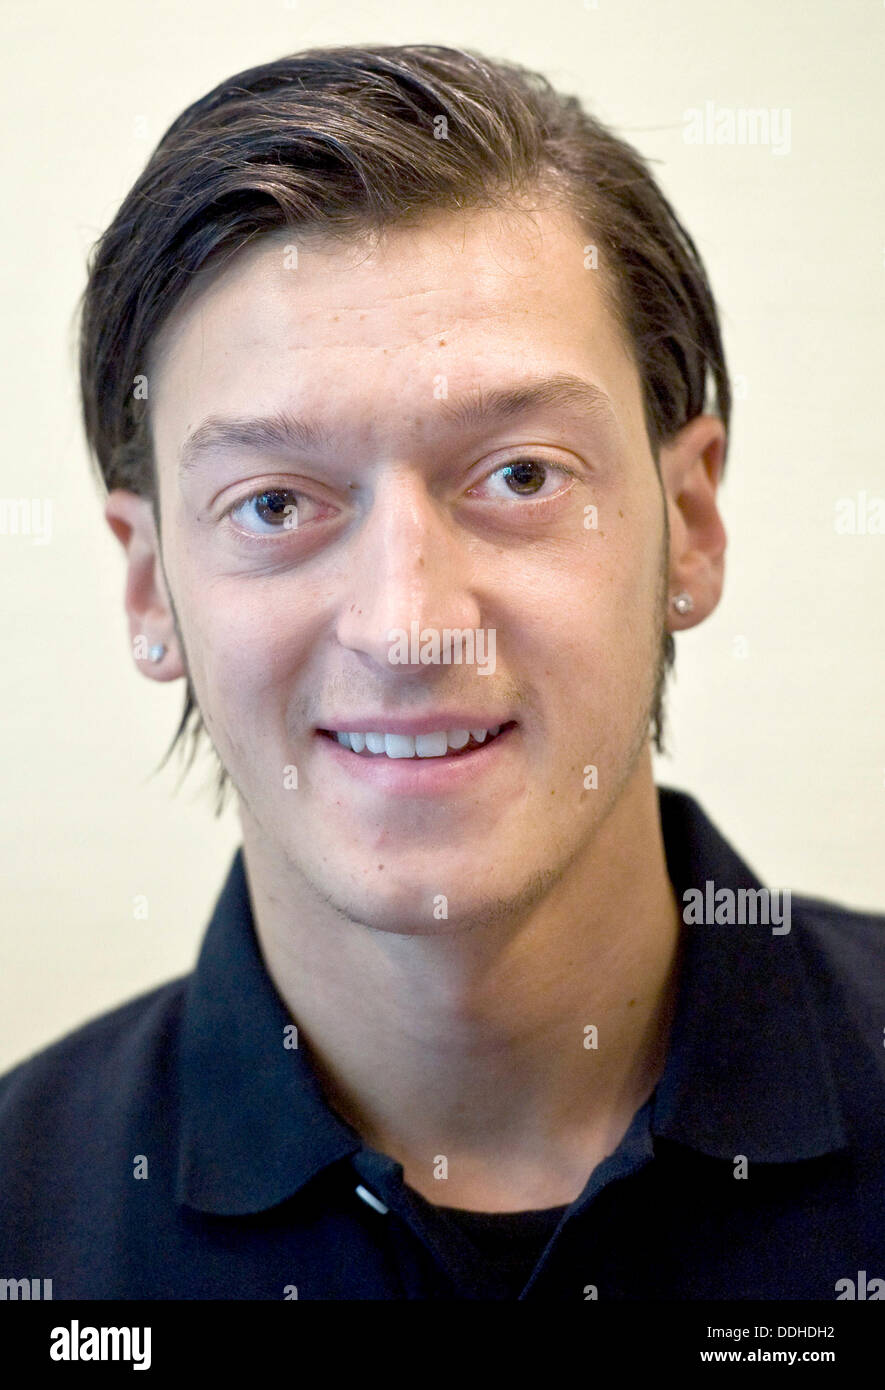 German national team soccer player, Mesut Oezil, smiles a press conference of German Railways (DB) subsidiary 'DB Services' in Duesseldorf, Germany, 10 June 2011. The soccer player and subsidiary company of German Railways (Deutsch Bahn), 'DB Services', are starting the model project 'DB Services Zukunfts-Camp - Kick Dich in Deine Berufliche Zukunft' (DB Services Future Camp - Kick Yourself into Your Future Carreer) to help pupils and youths in Gelsenkirchen, Germany, from 25 July until 05 August 2011. Photo: Victoria Bonn-Meuser Stock Photo